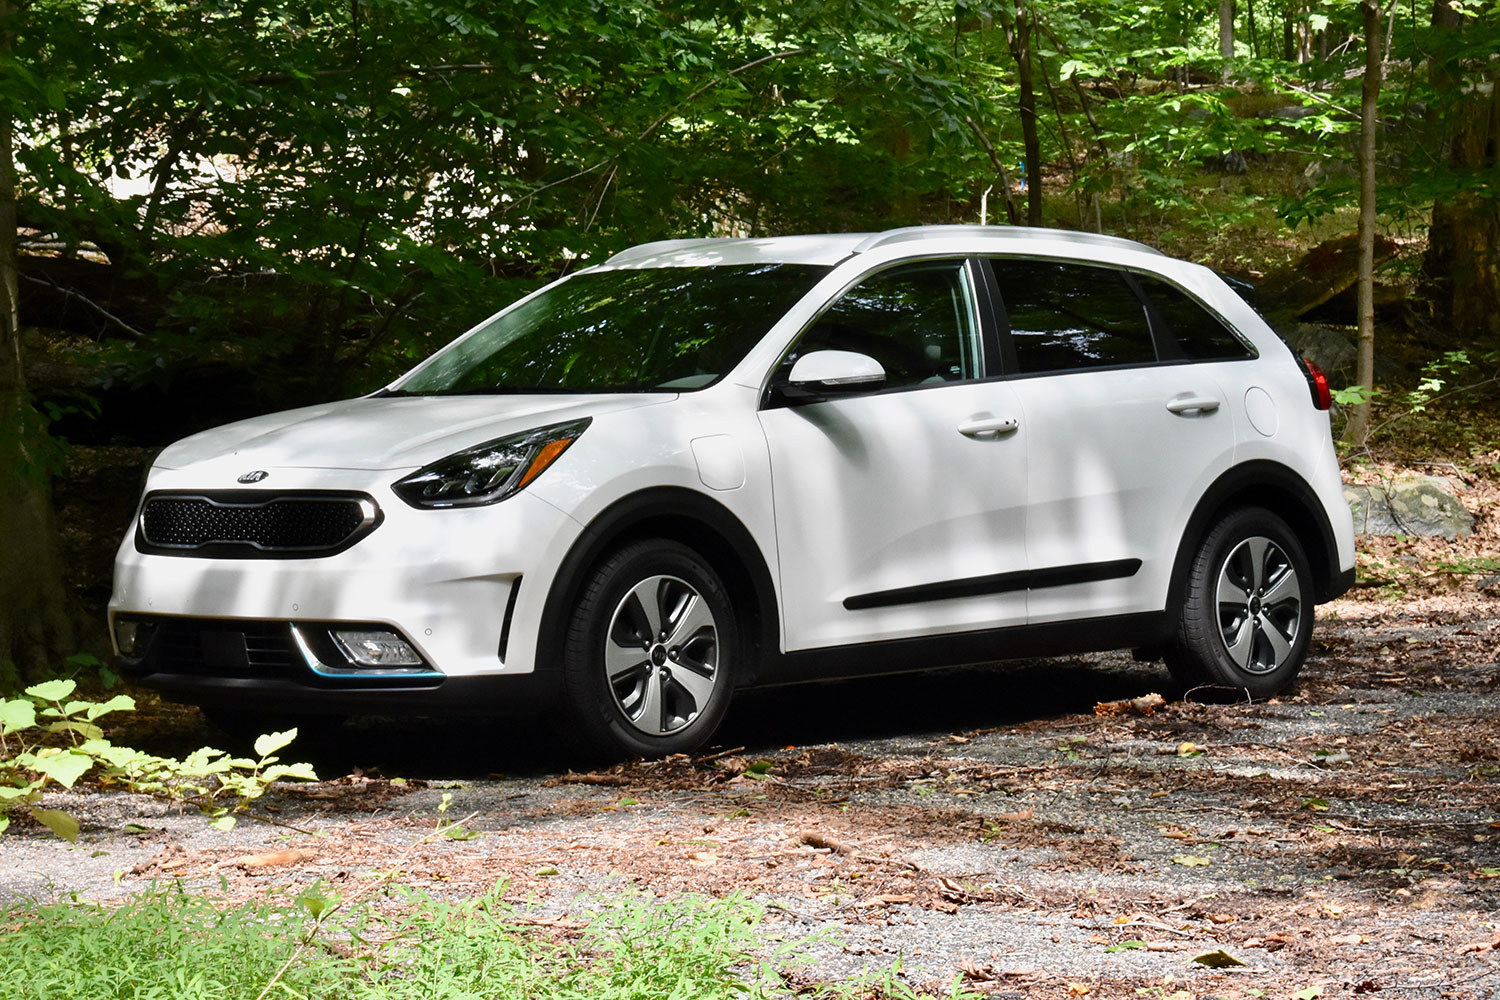 2018 Kia Niro Review, Pricing, & Pictures